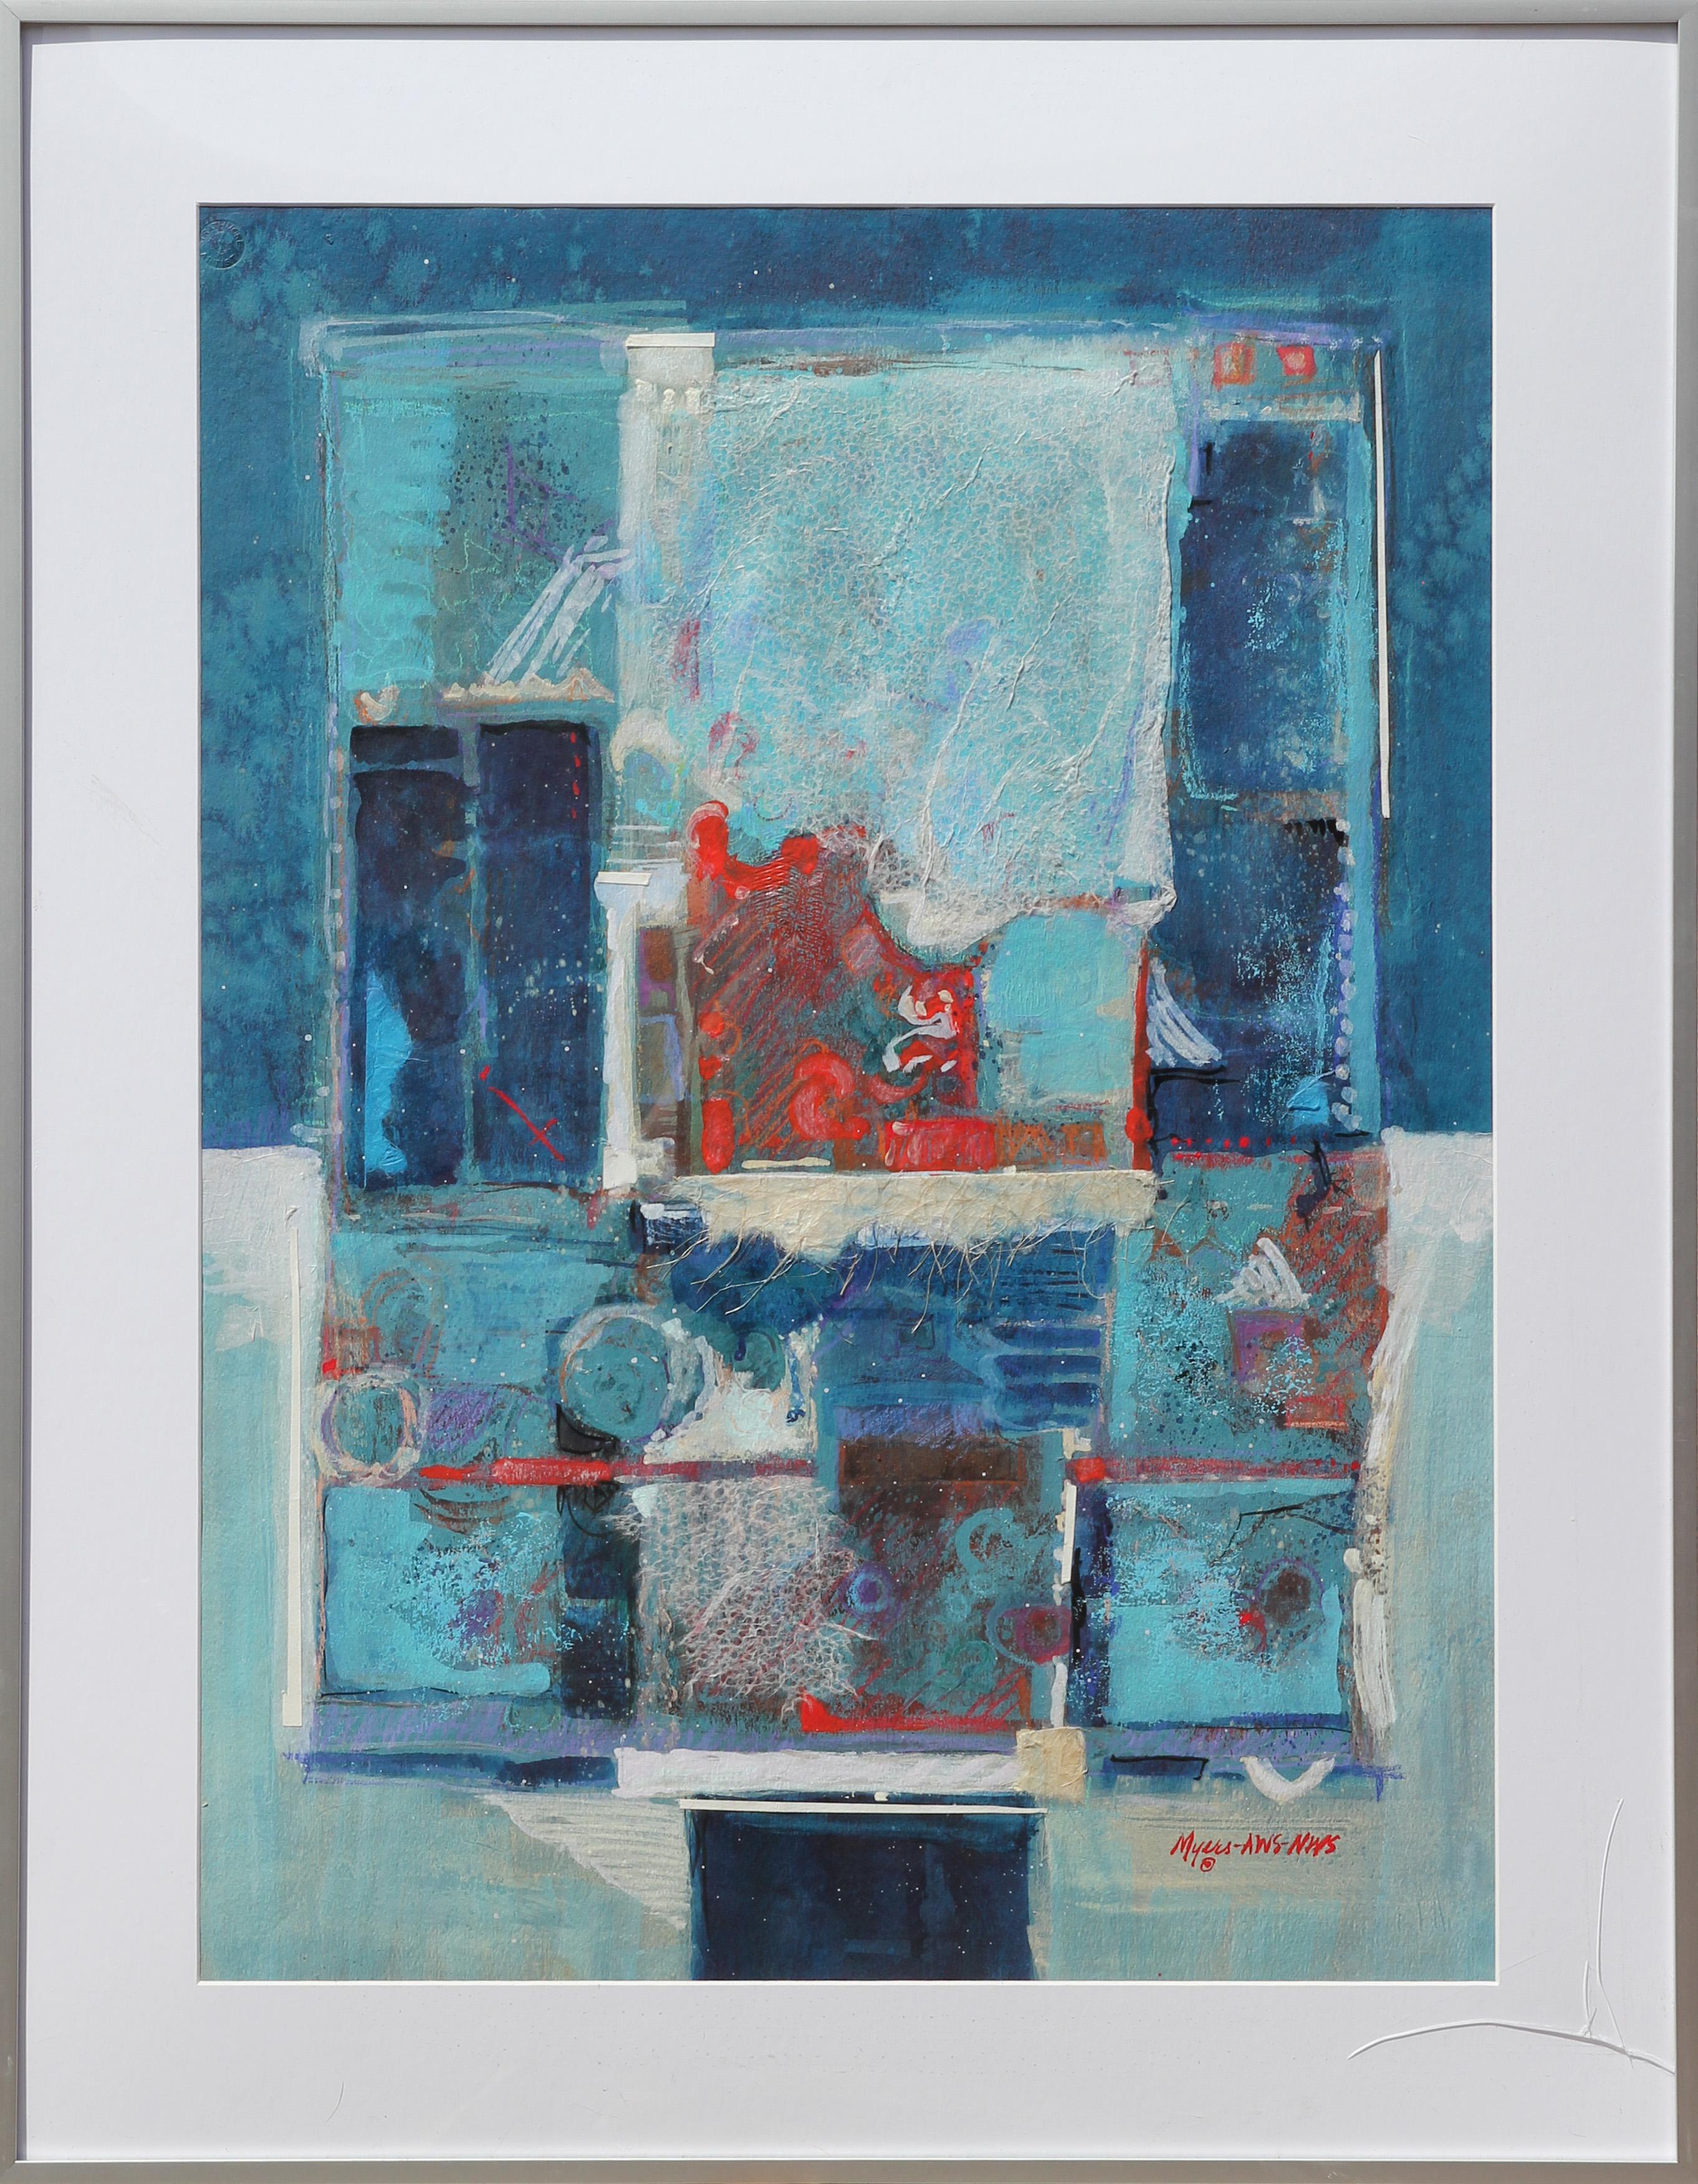 "Secret Chamber XXIX" Blue, Teal, and Red Toned Modern Abstract Painting - Mixed Media Art by Carole Myers